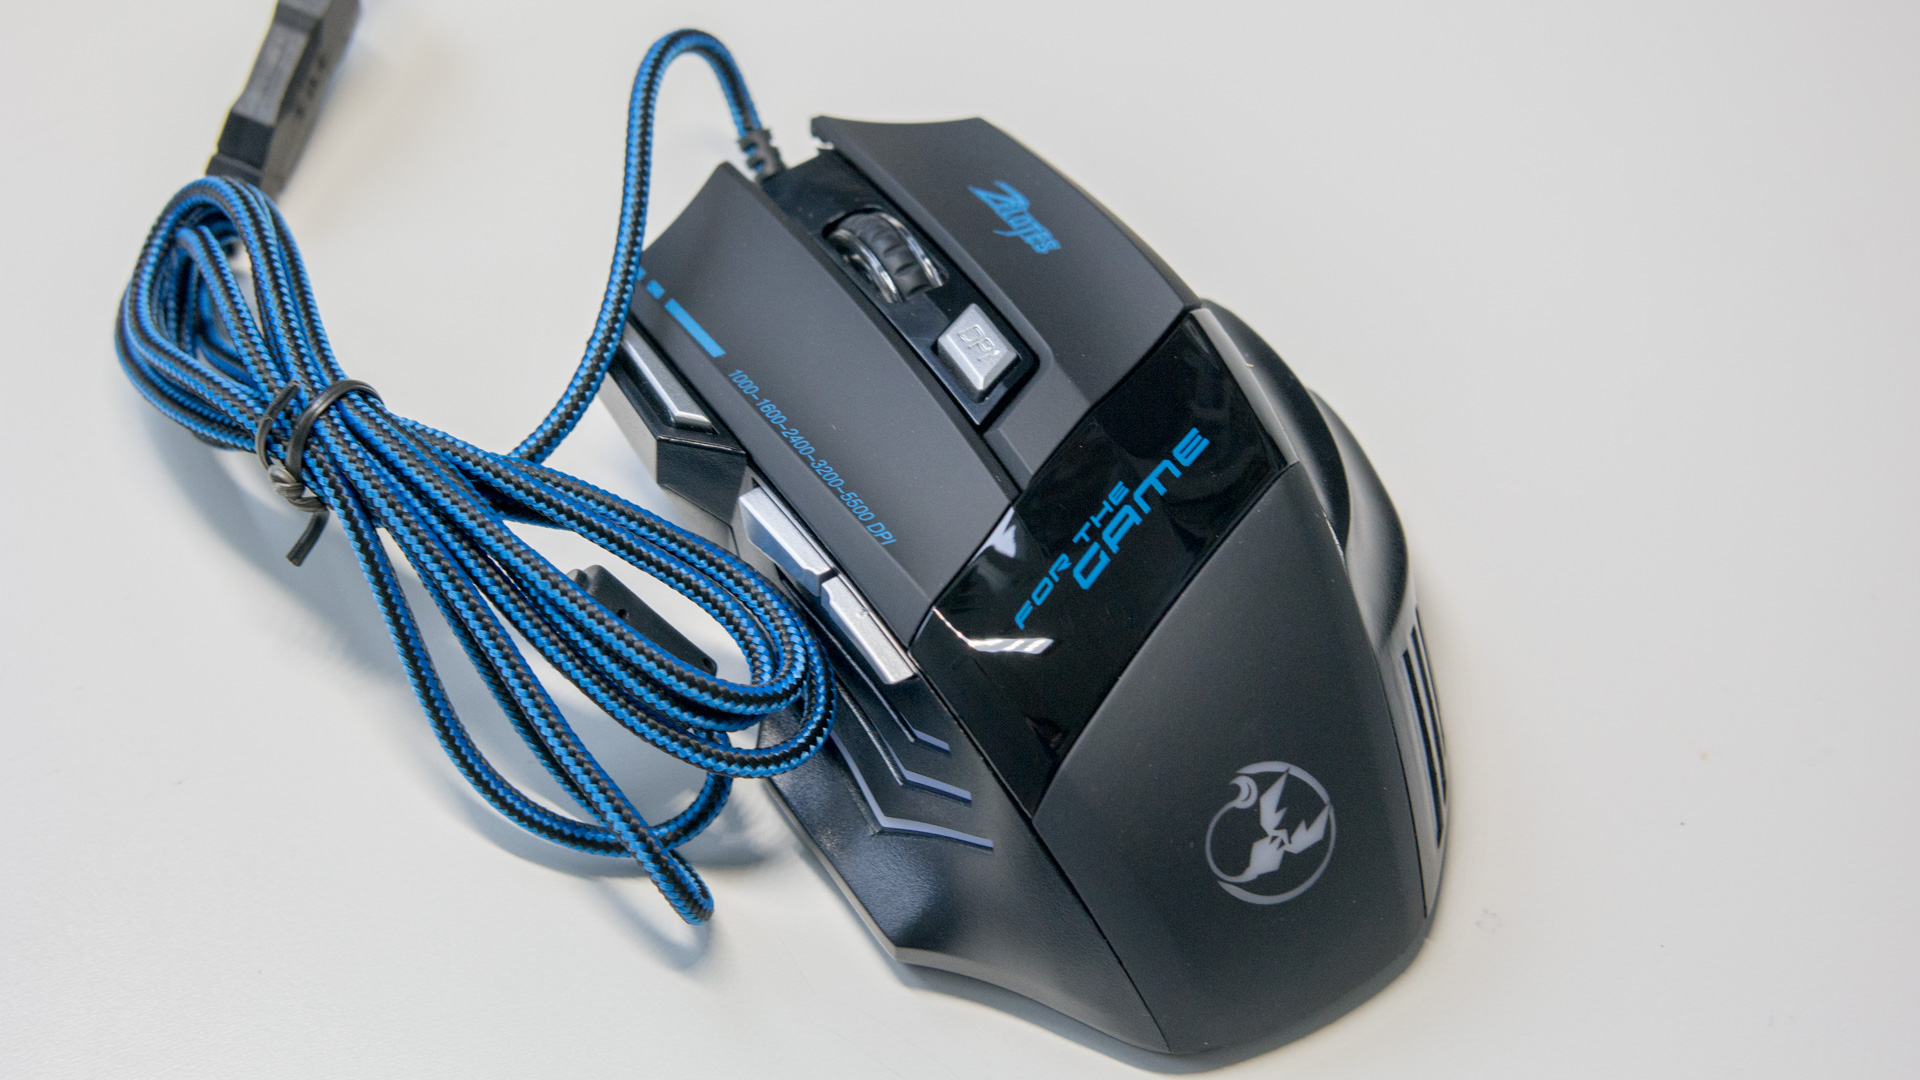 zelotes gaming mouse instructions